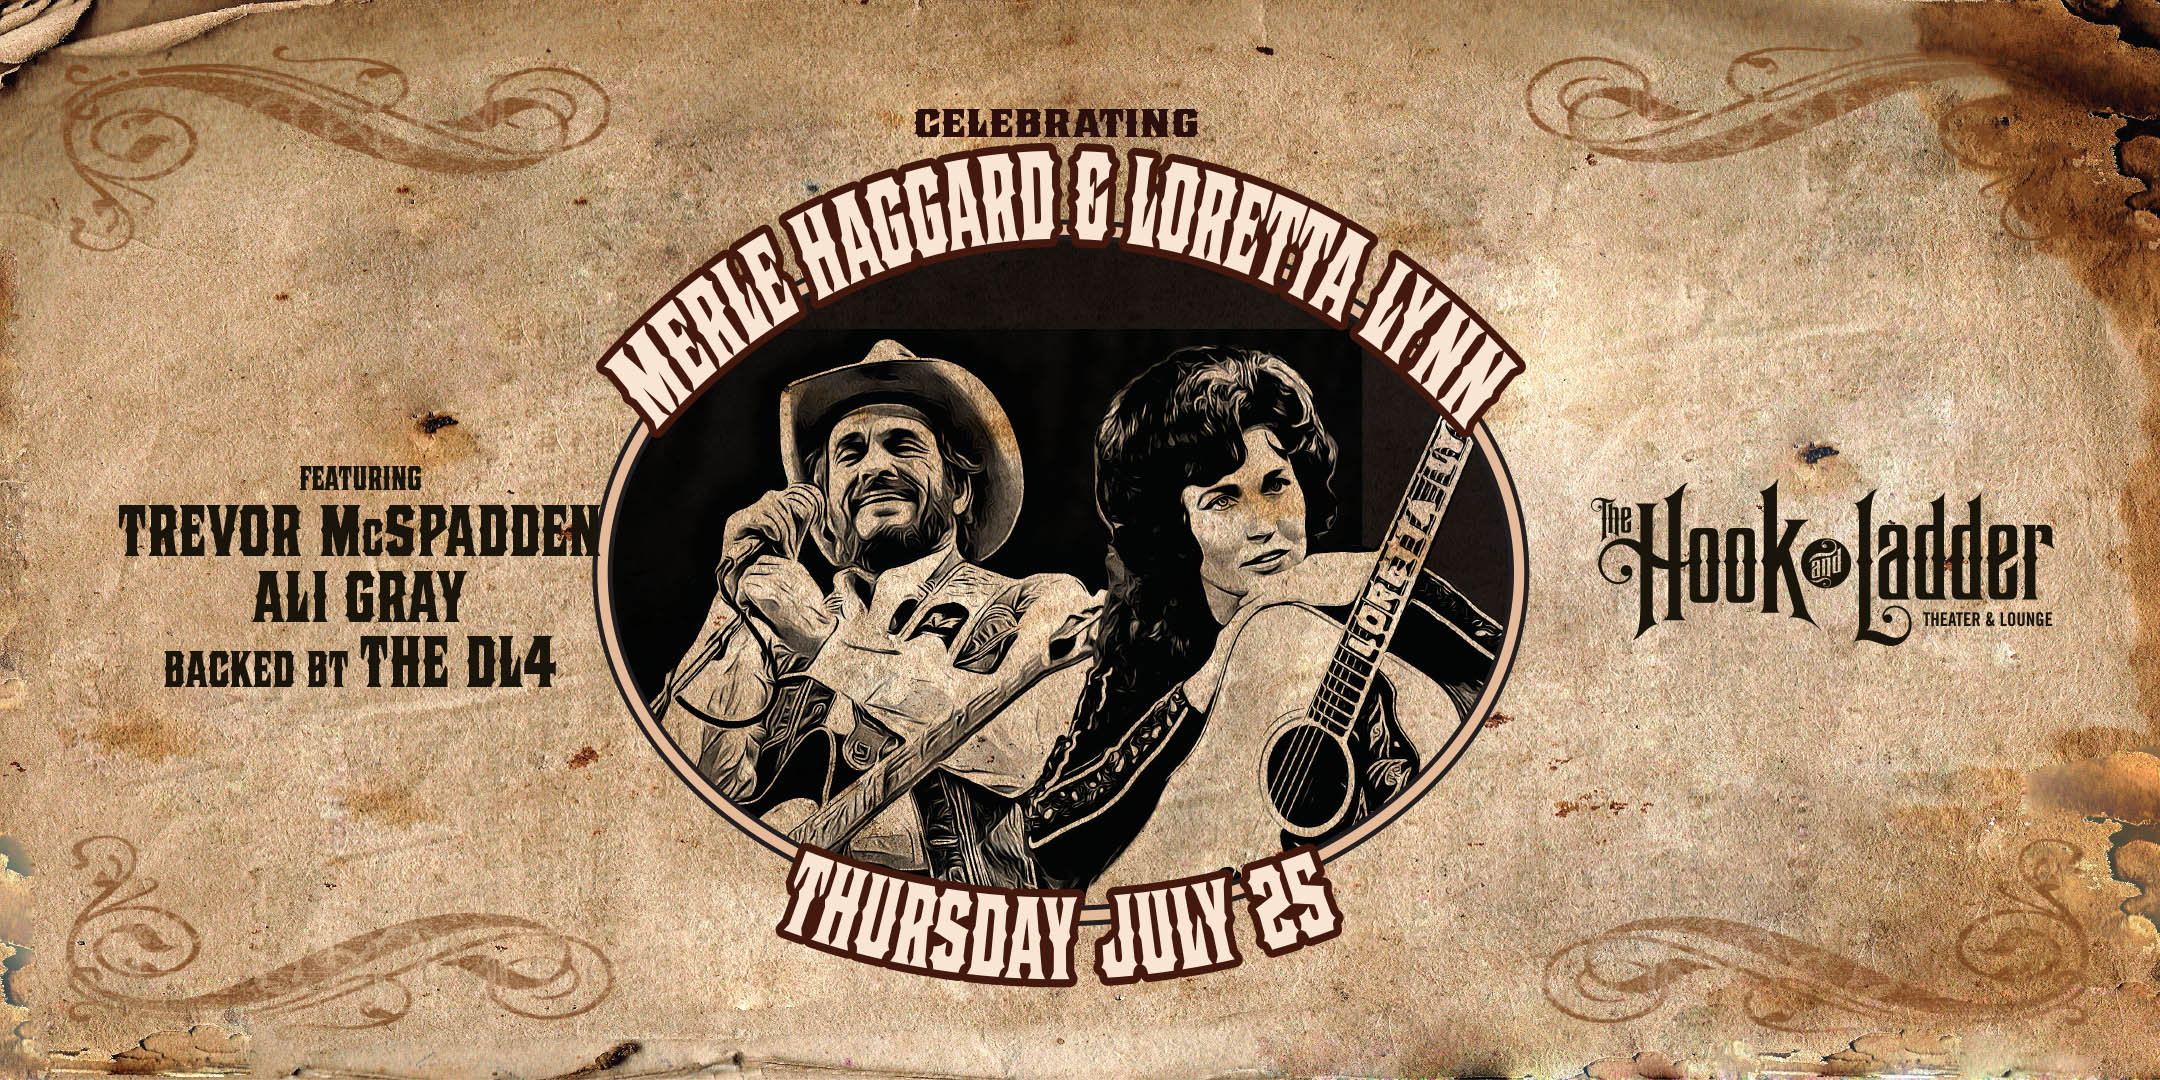 “Celebrating Merle Haggard & Loretta Lynn” Featuring Trevor McSpadden, Ali Gray, and The DL4 Thursday, July 25 The Hook and Ladder Theater Doors 7:00pm :: Music 7:30pm :: 21+ Reserved Seats: $20 GA $15 Advance / $20 Day of Show